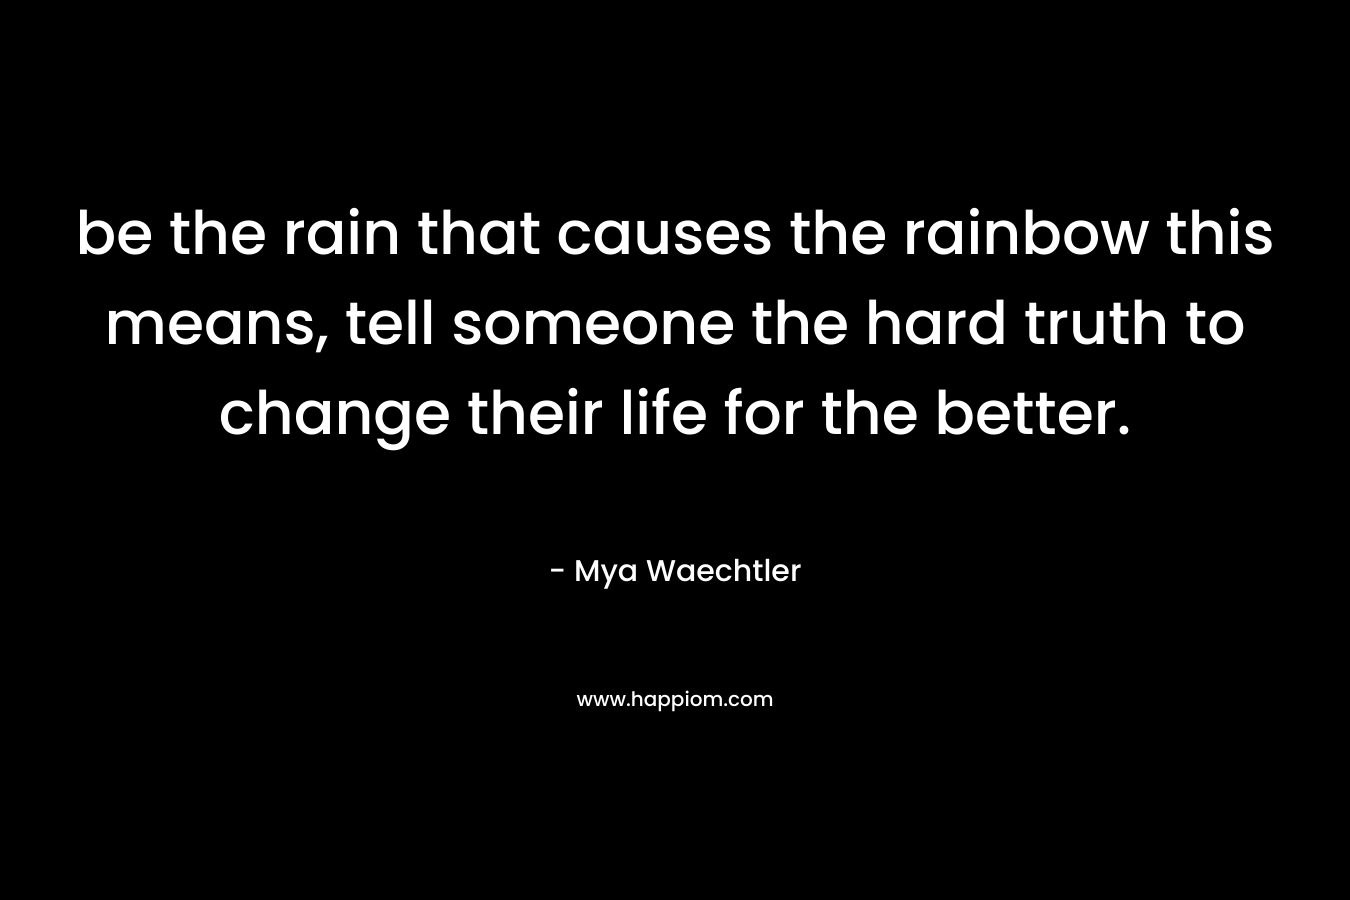 be the rain that causes the rainbow this means, tell someone the hard truth to change their life for the better. – Mya Waechtler